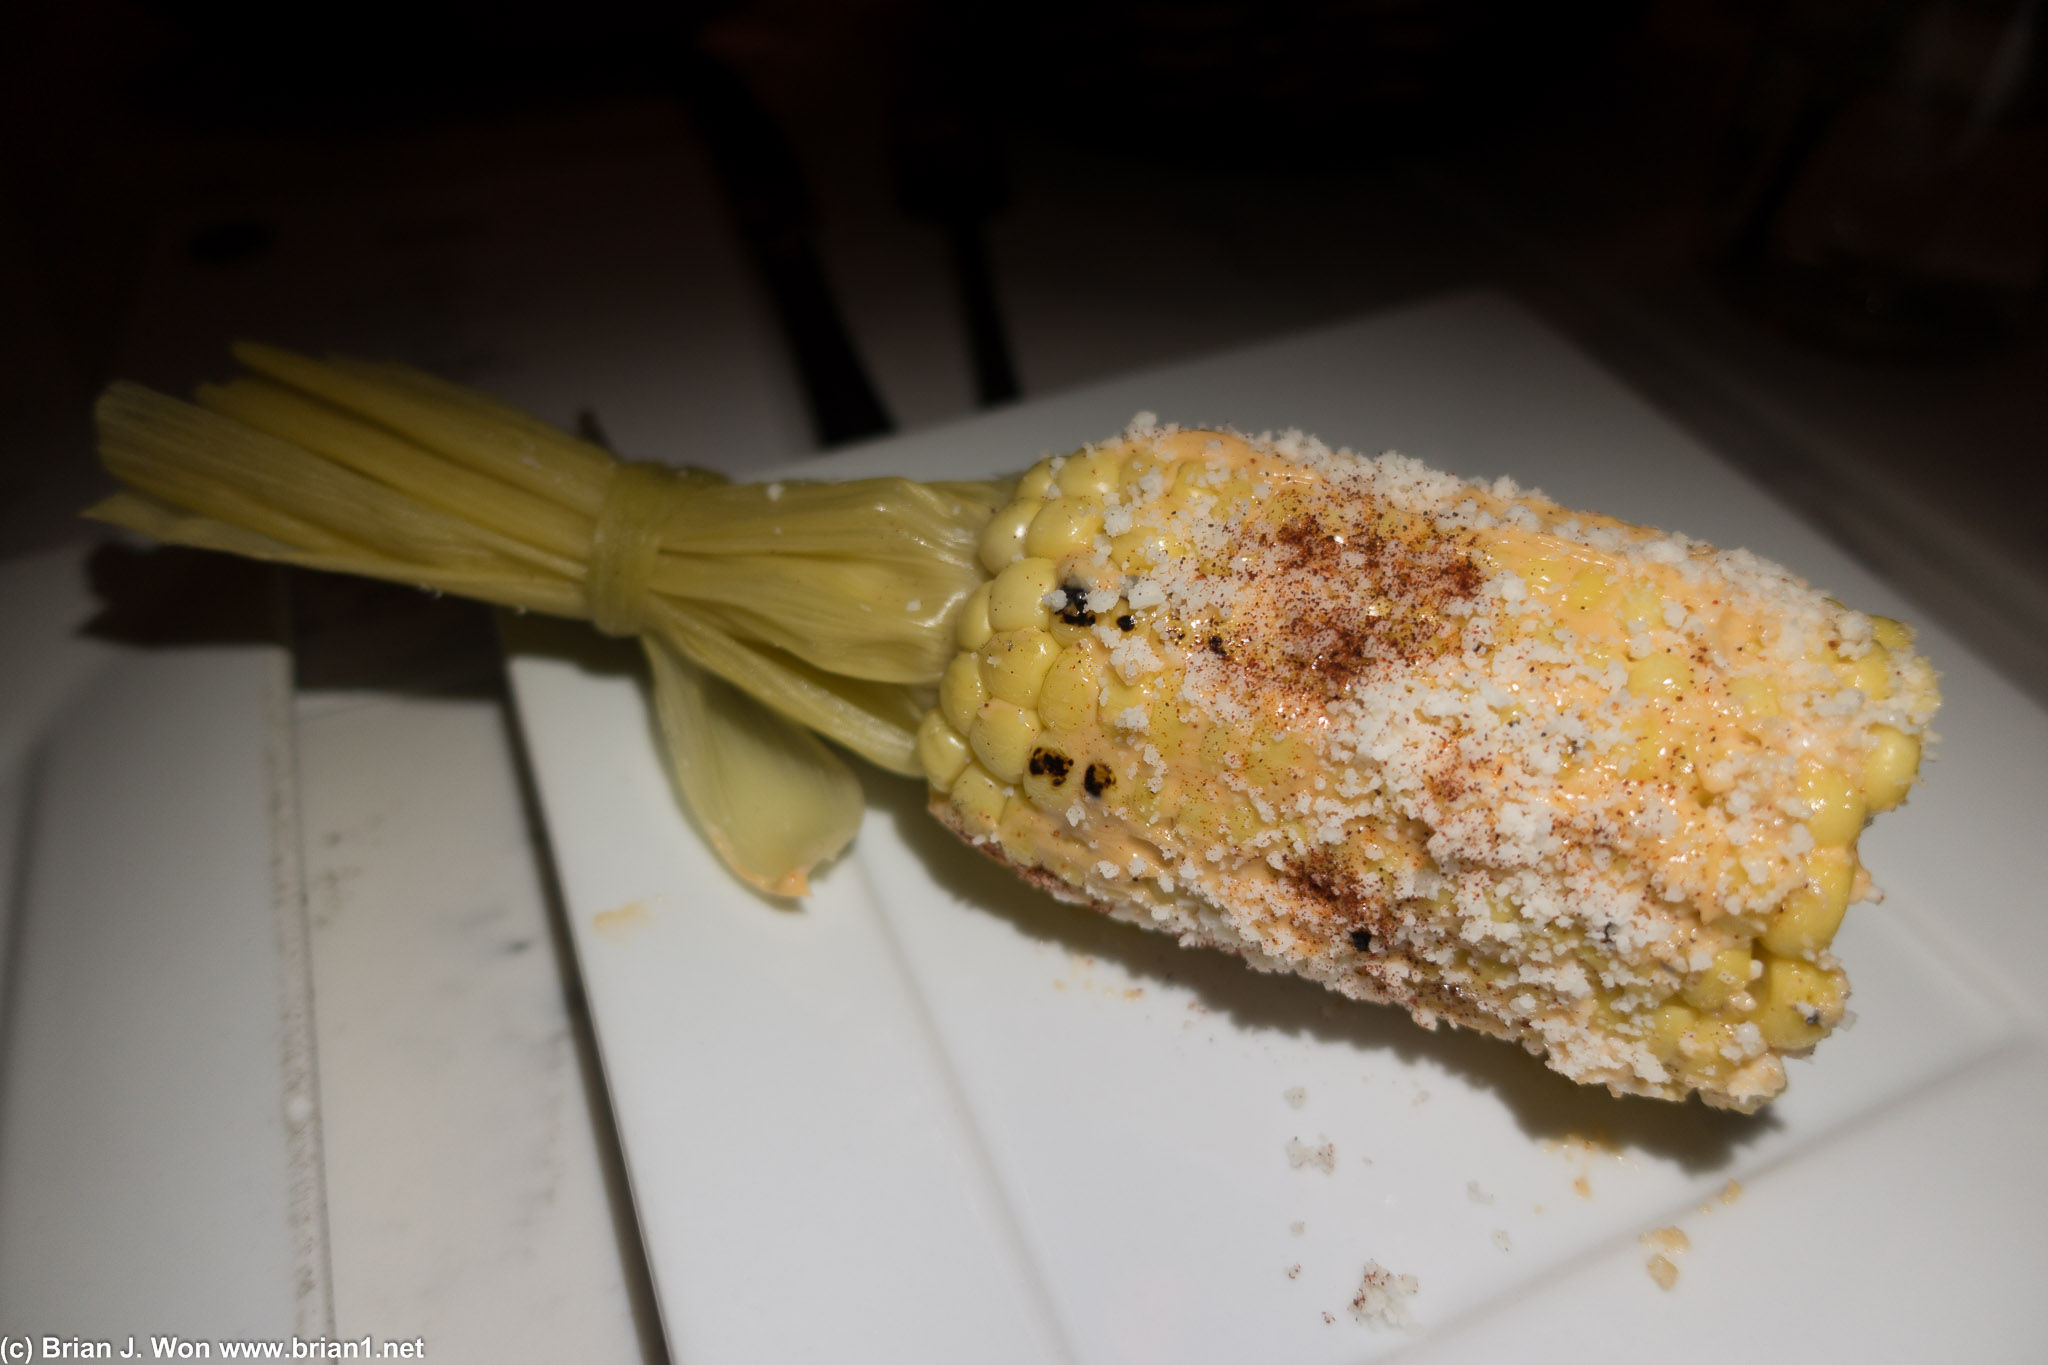 Mexican street corn. Would've been awesome hot, but instead it came out lukewarm. :-/